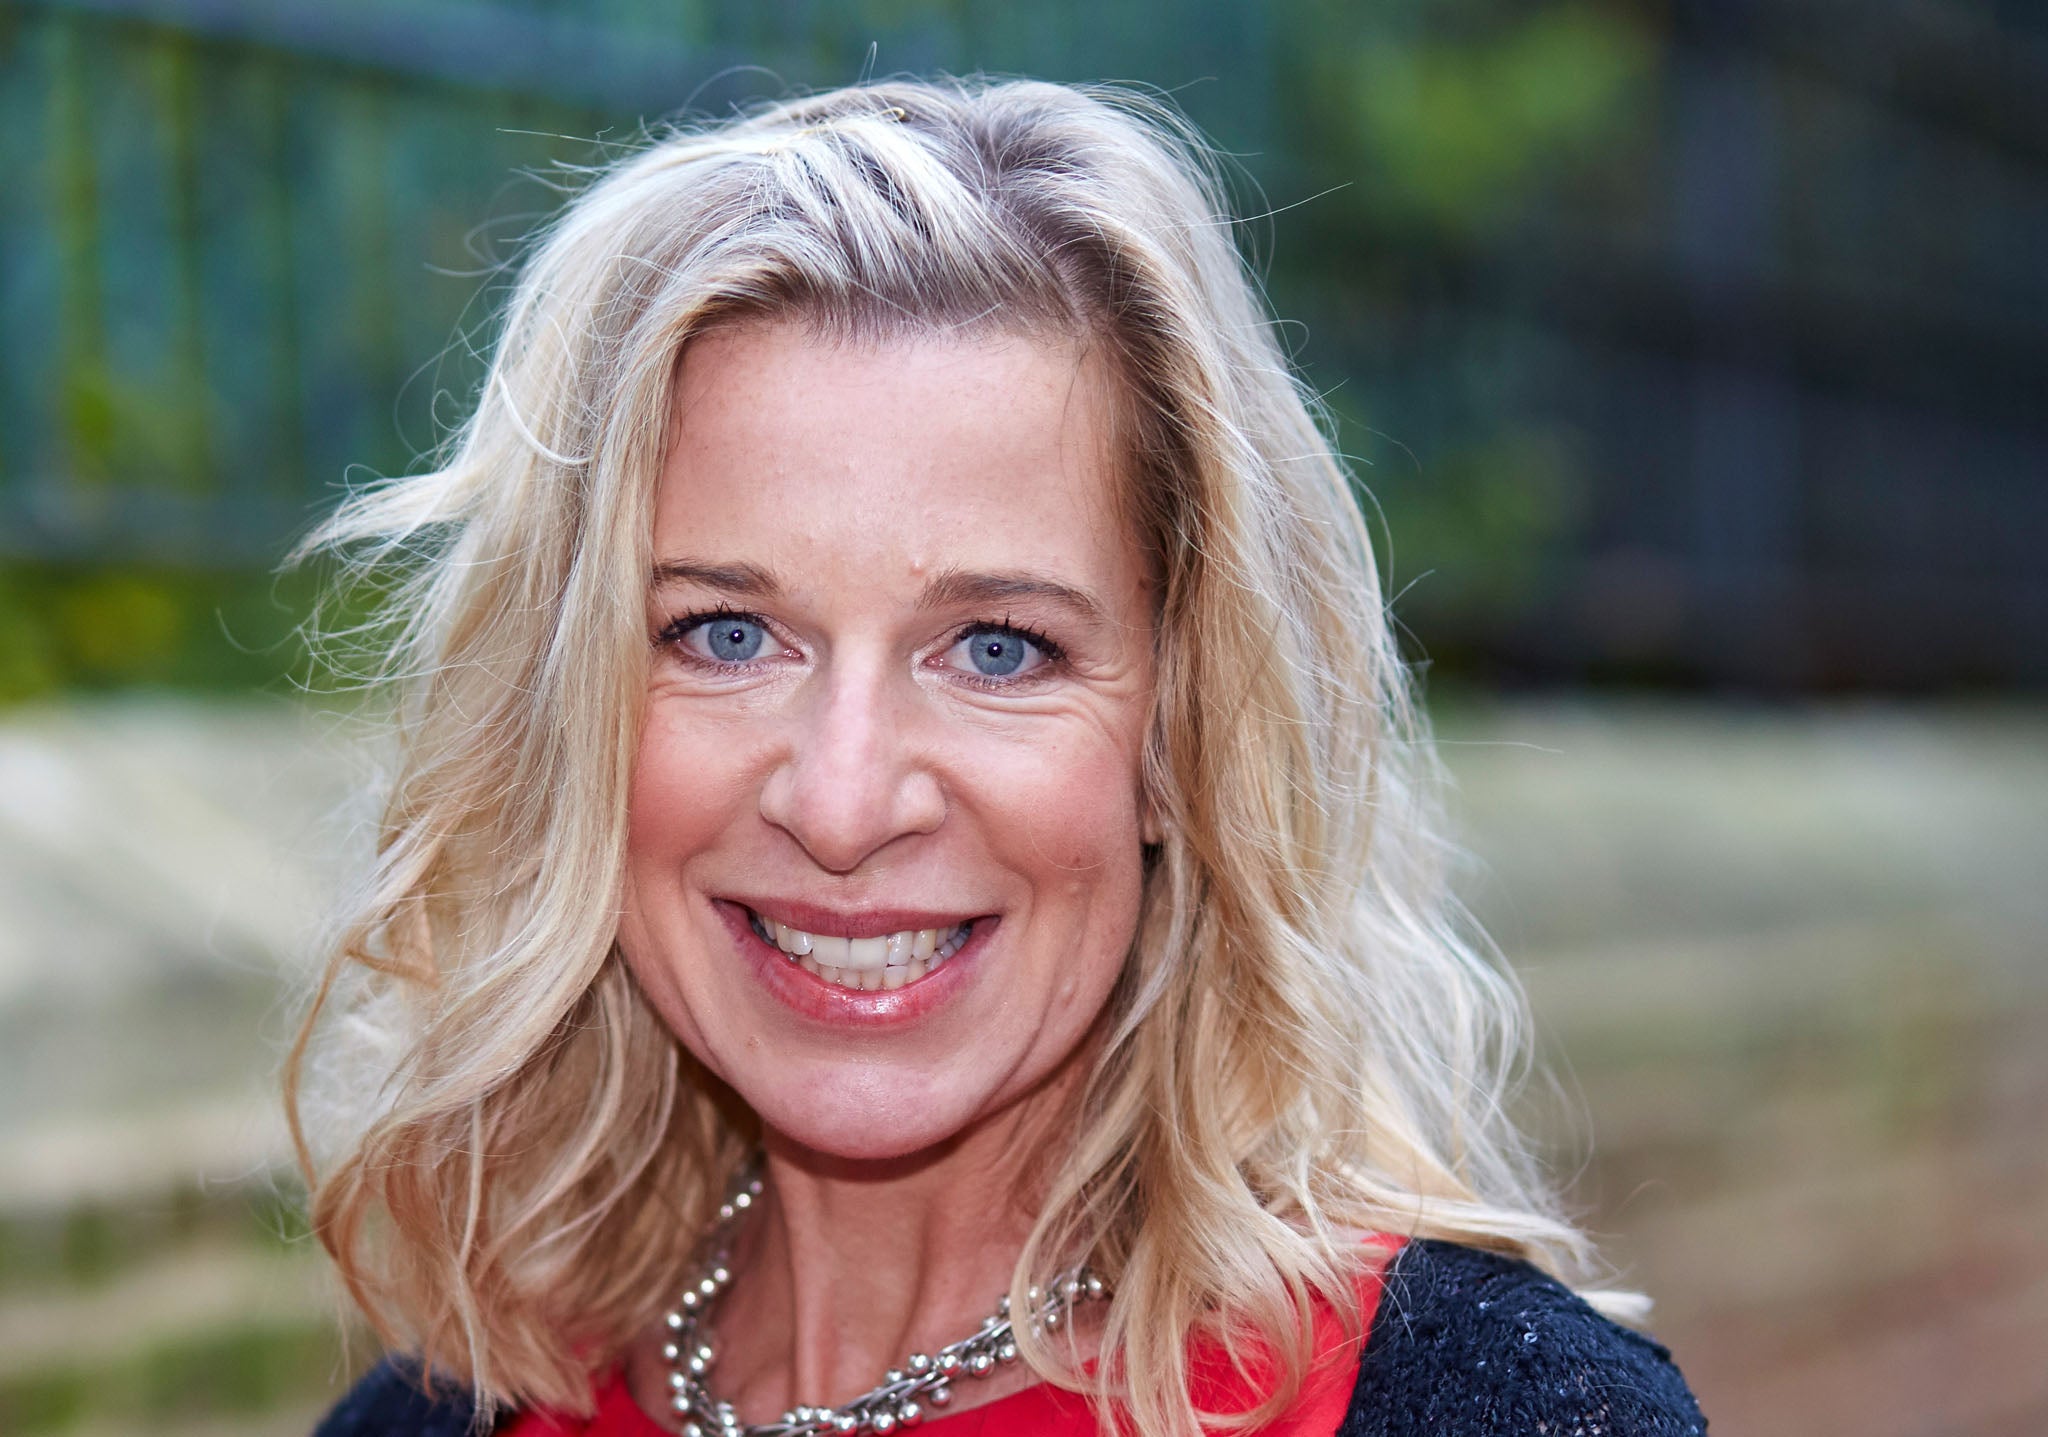 Controversial pundit Katie Hopkins has condemned Jessica-Ennis Hill